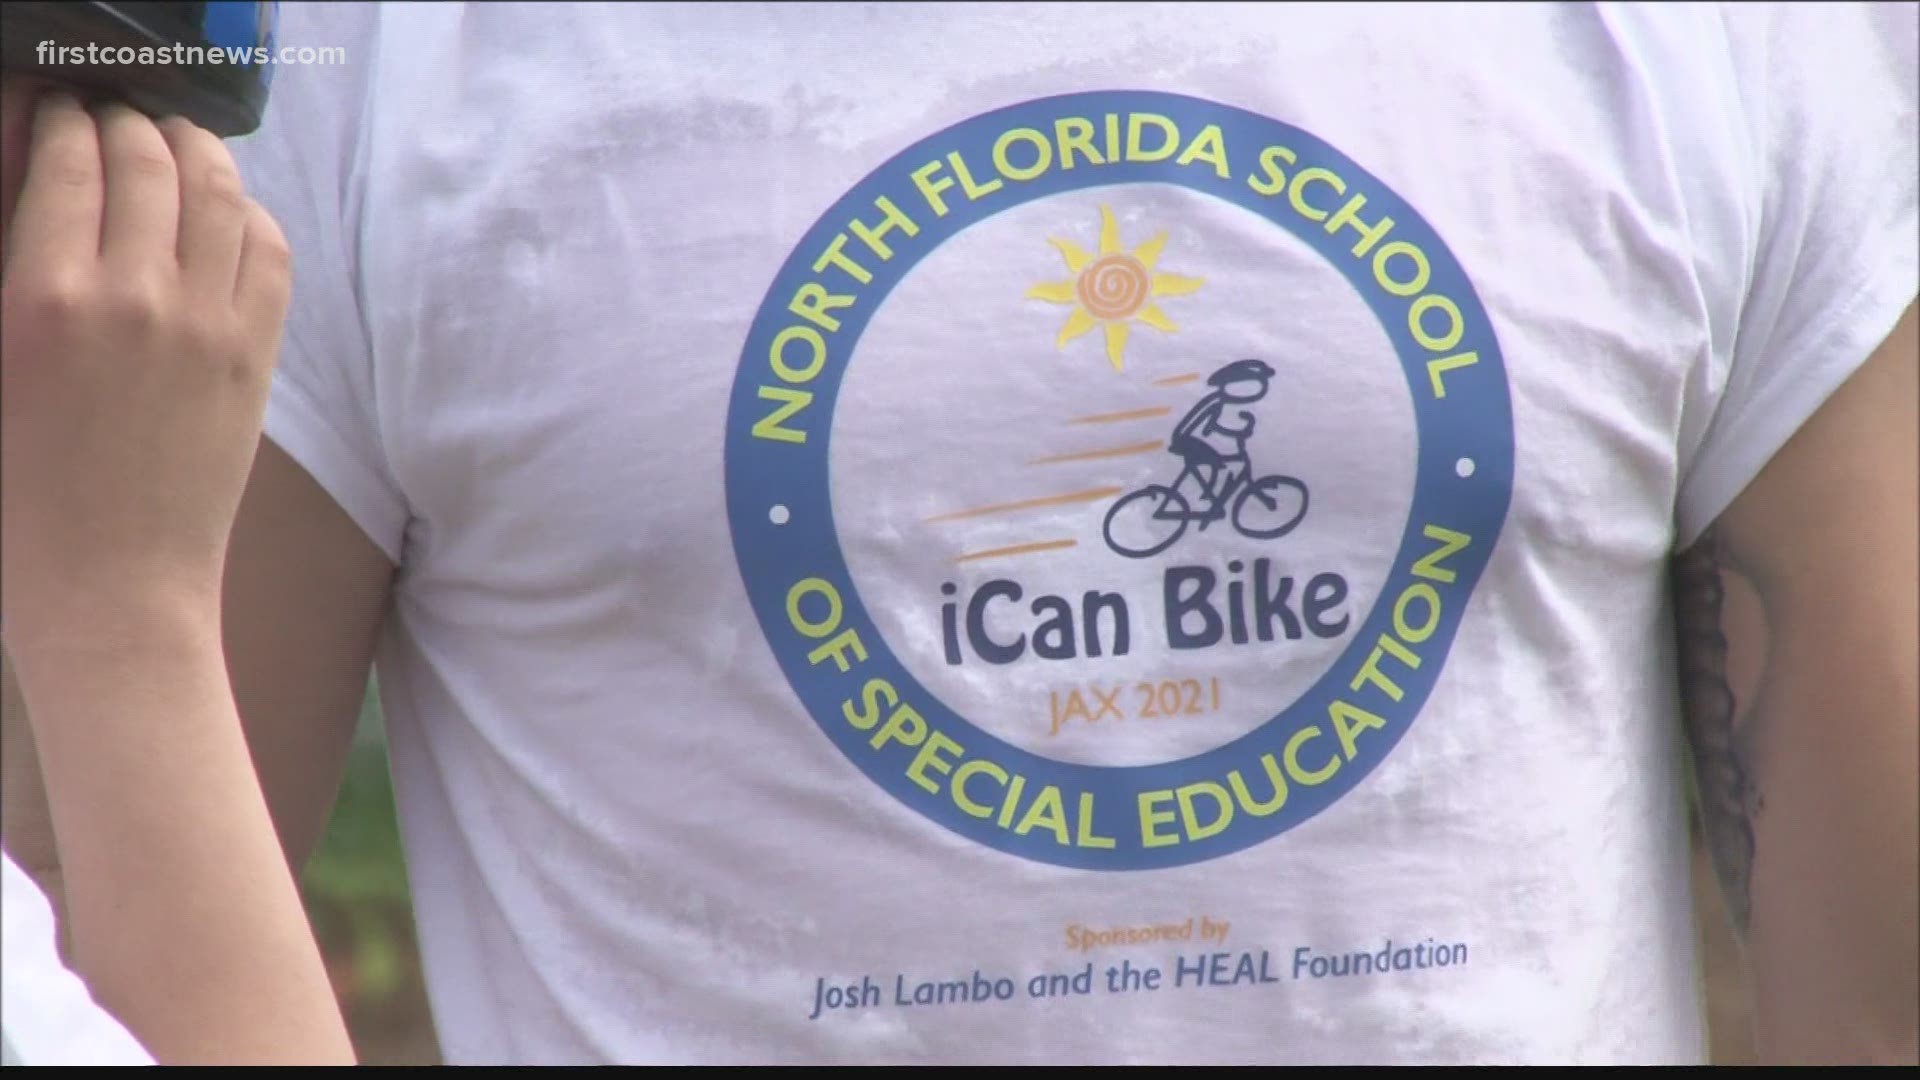 Jaguars kicker Josh Lambo brought the "iCan Bike" program to the North Florida School of Special Education for the first time this summer.